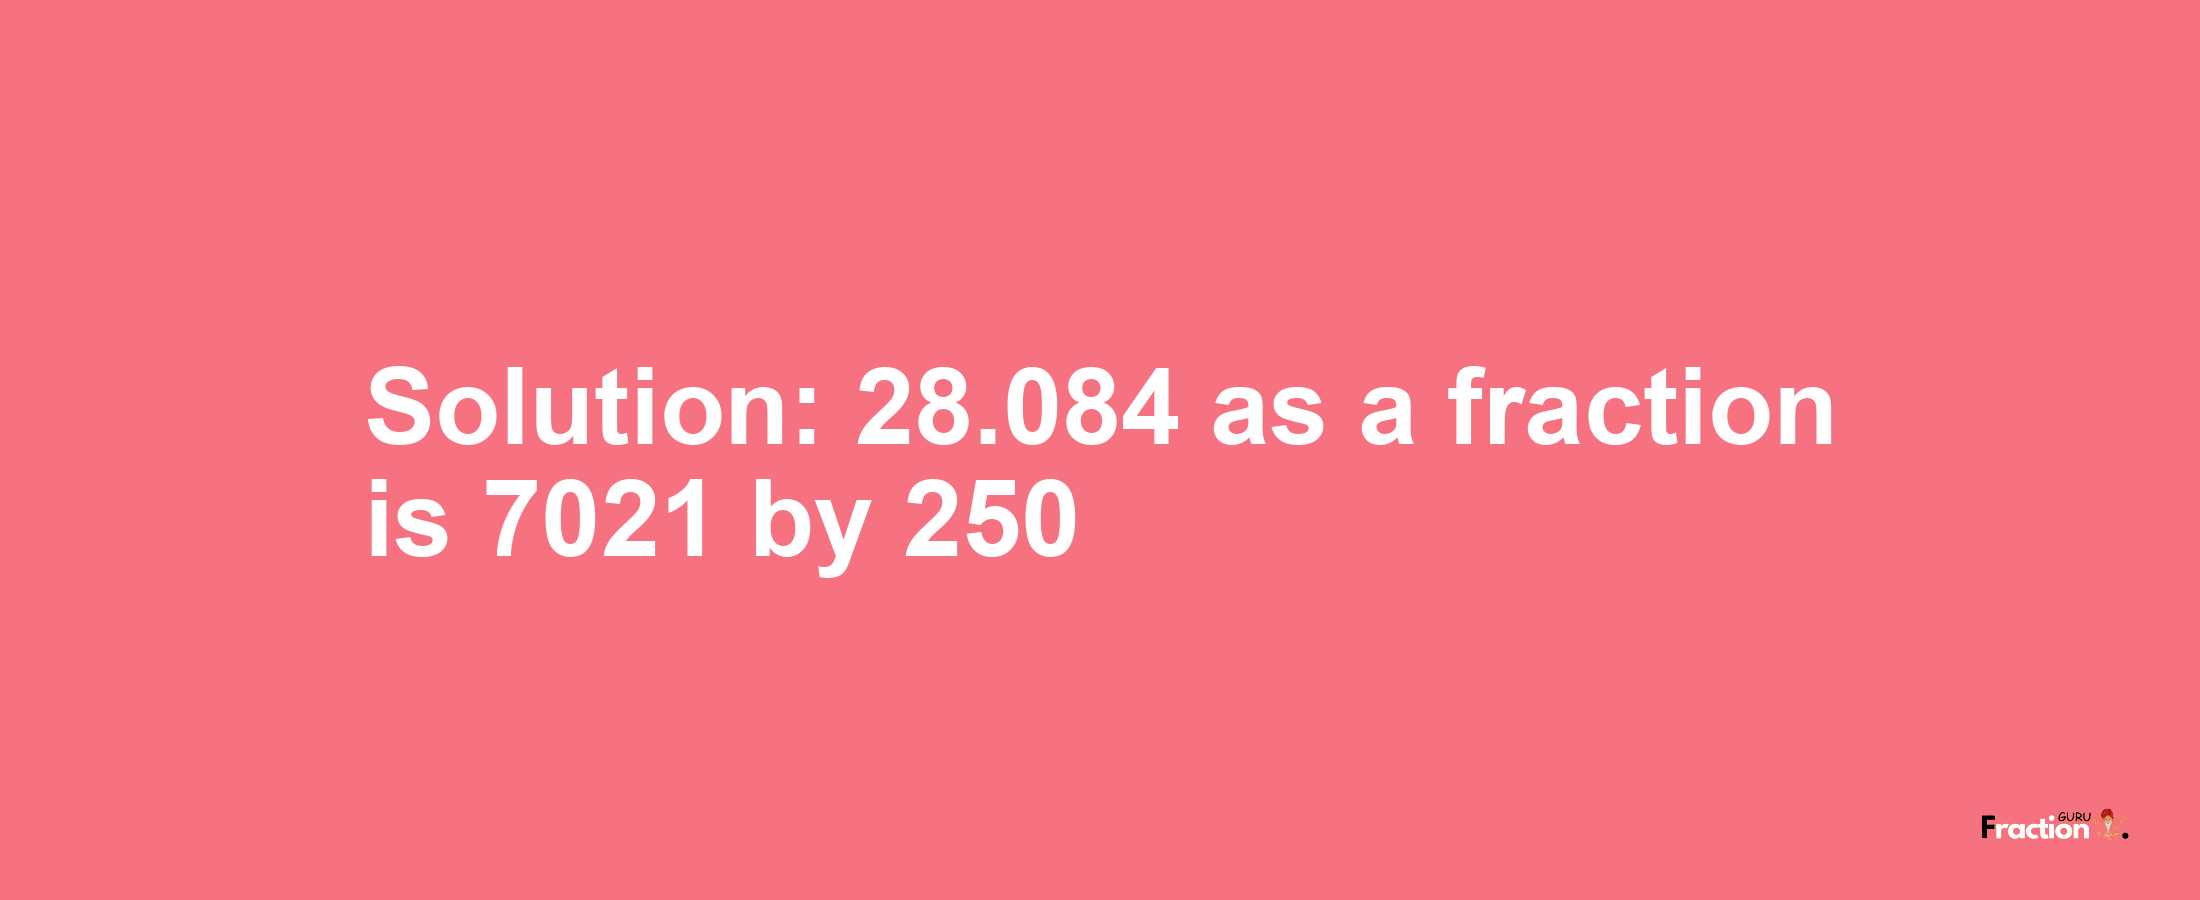 Solution:28.084 as a fraction is 7021/250